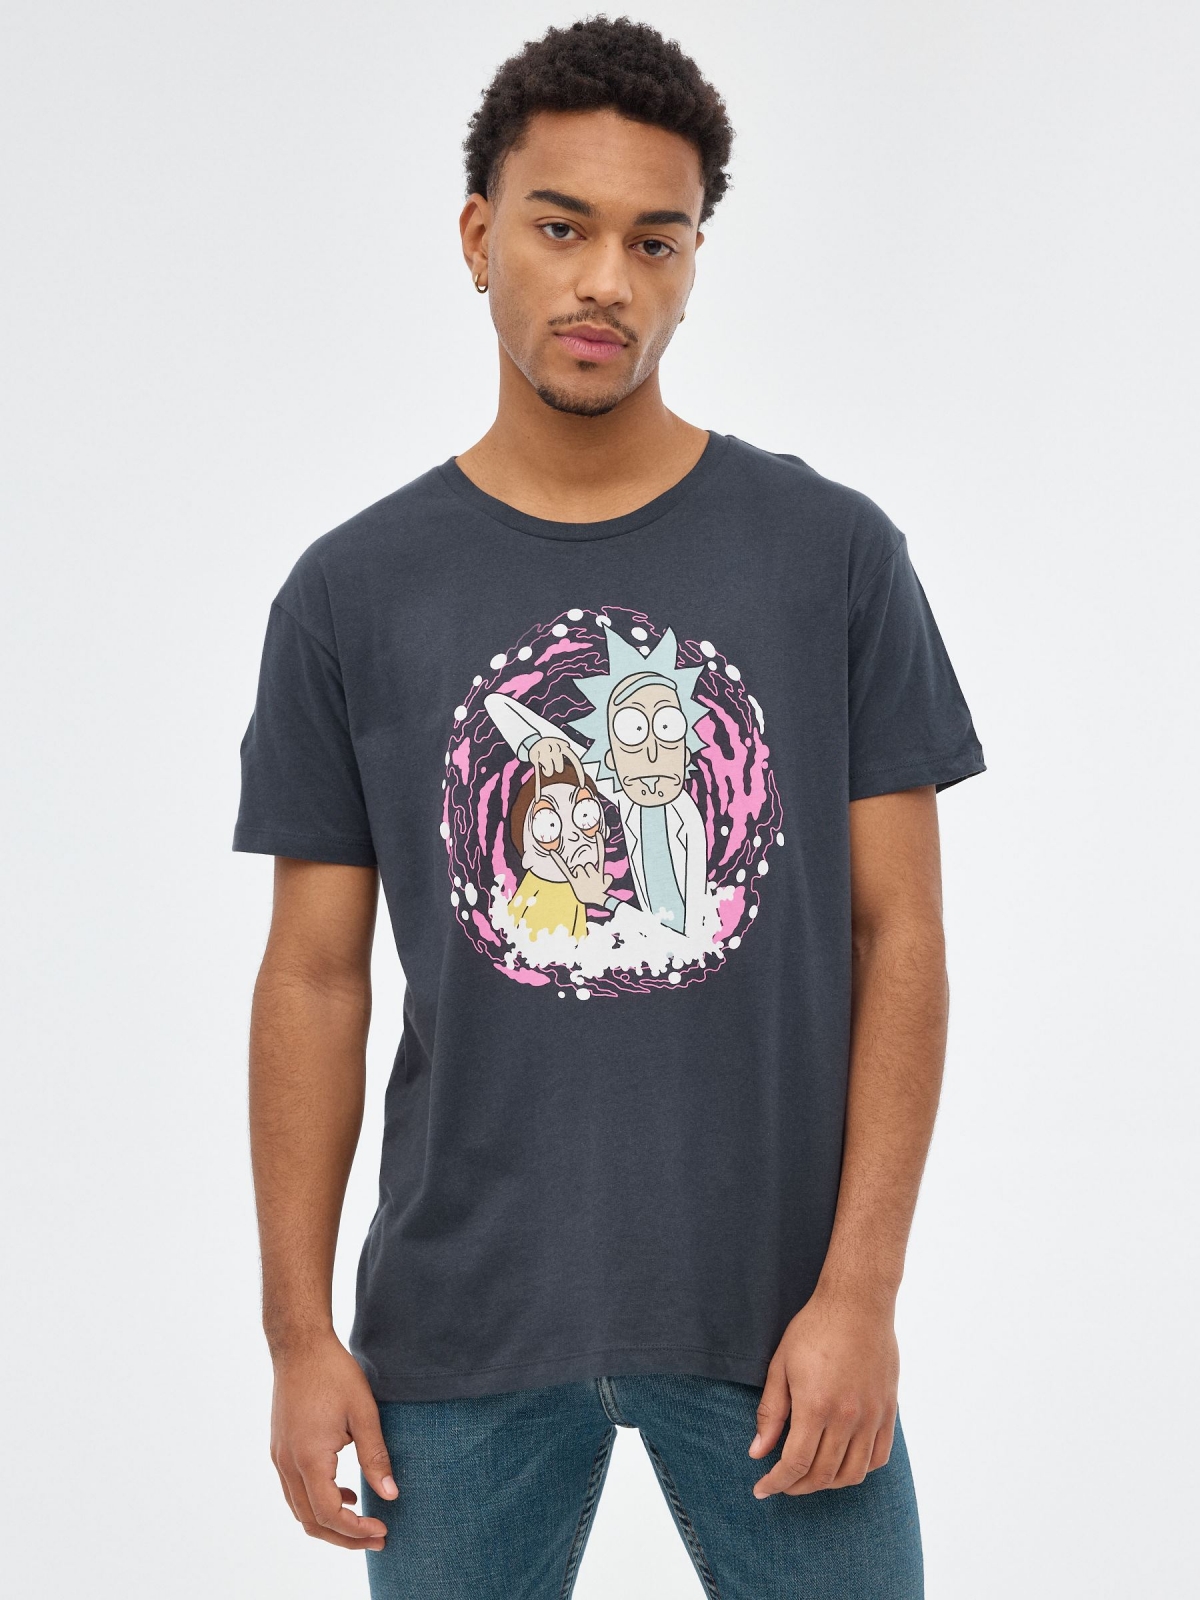 Ricky&Morty black T-shirt dark grey middle front view